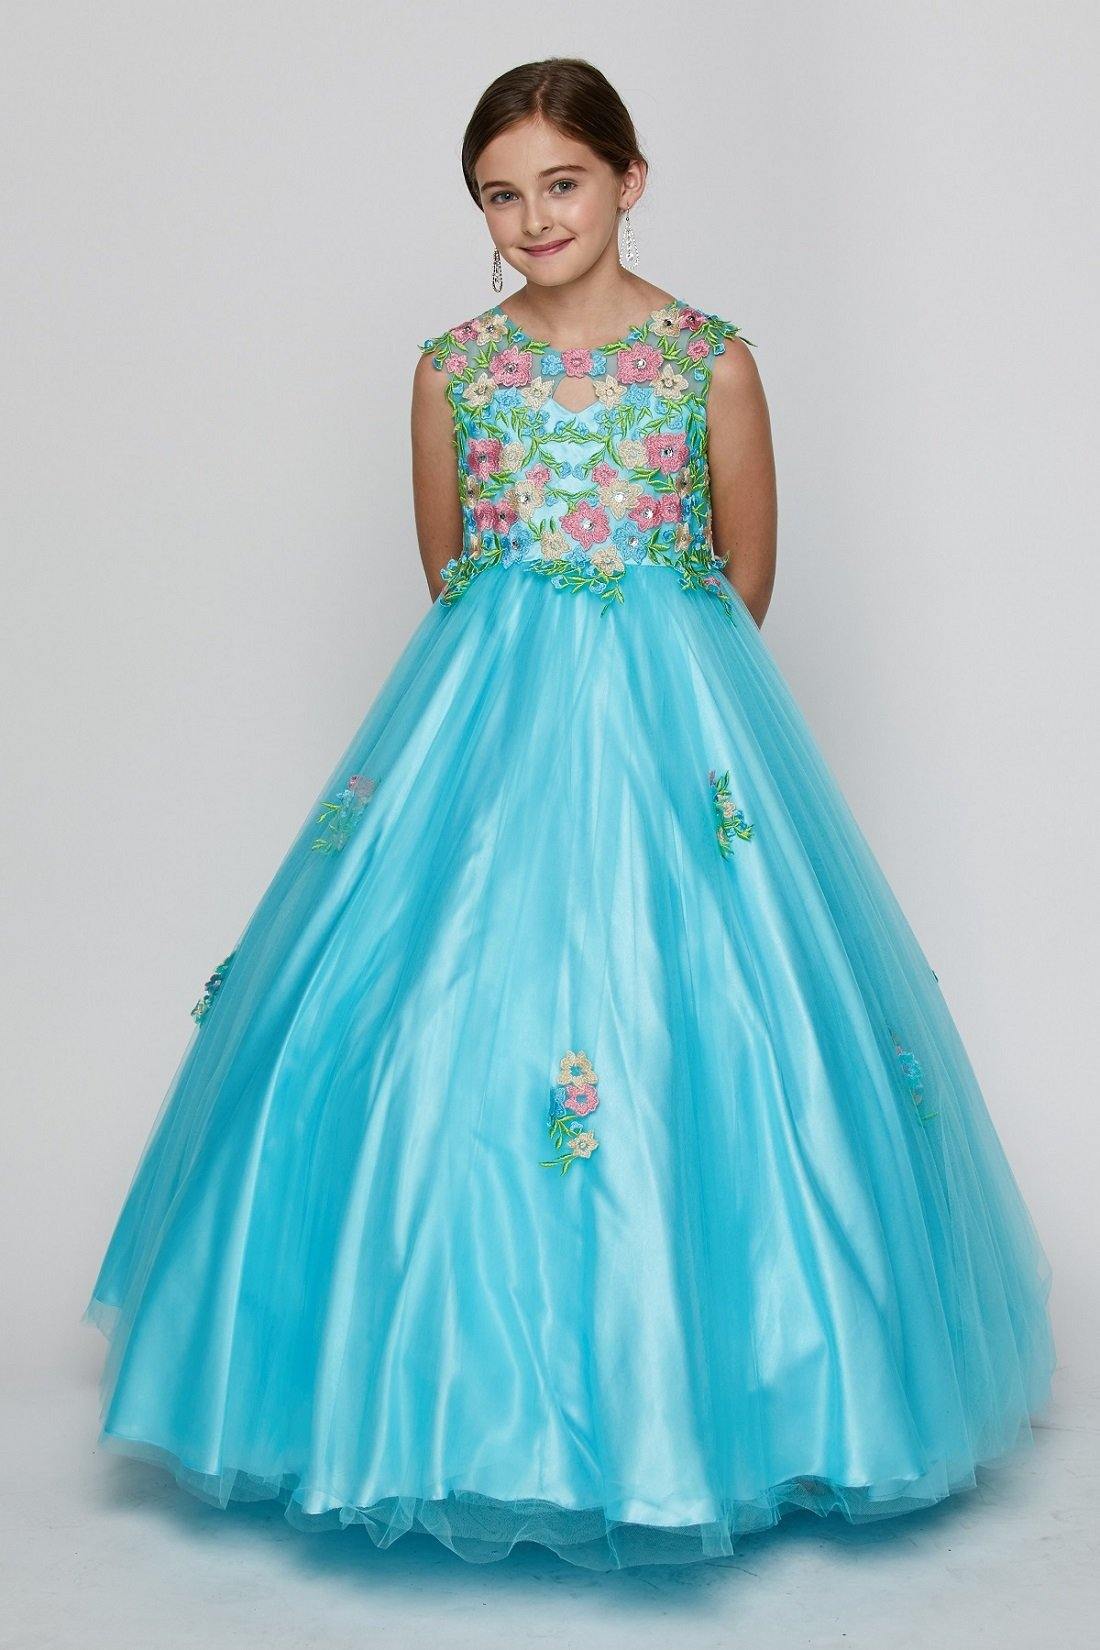 Aqua Sleeveless Floral Lace and Tulle Flower Girl Dress for $149.99 – The  Dress Outlet